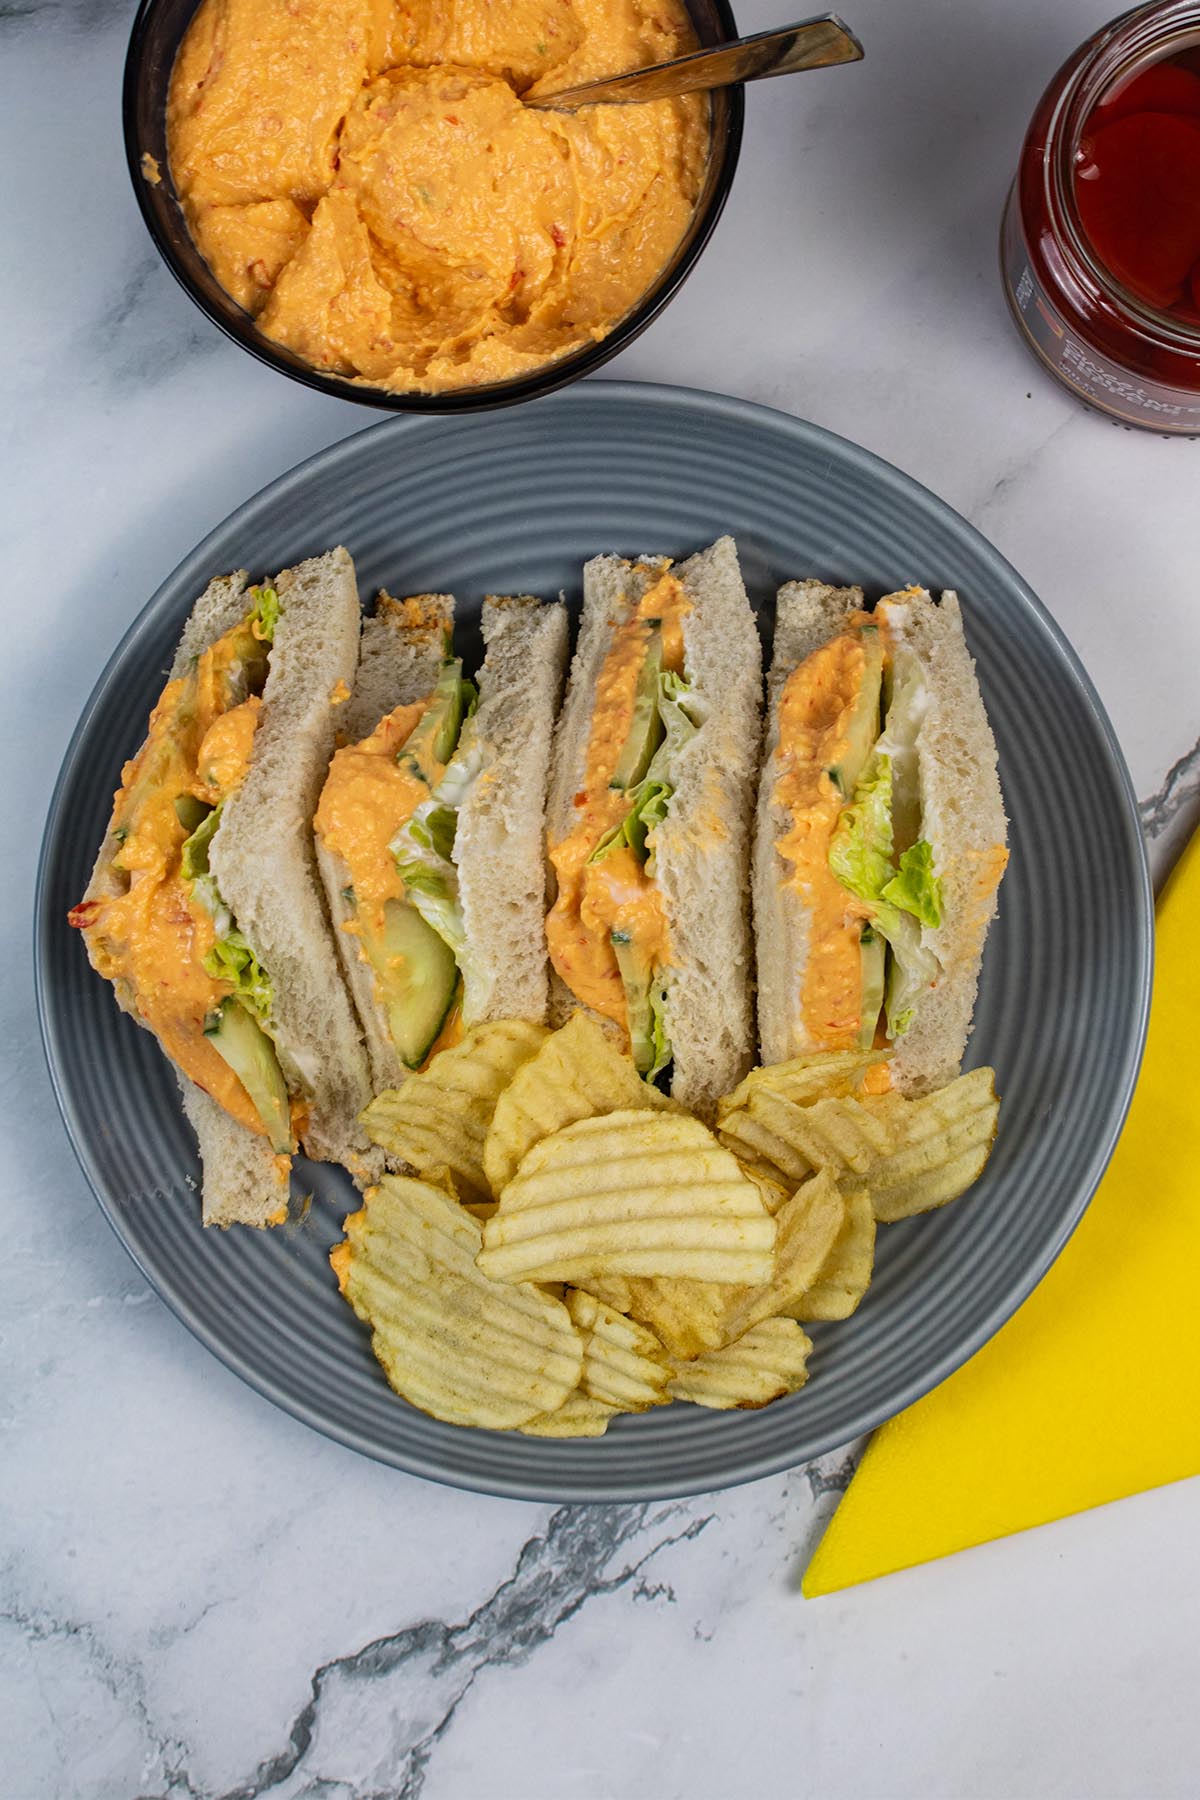 Pimento cheese sandwiches on a grey plate with crinkle crisps. Small bowl of extra sandwich filler, jar of piquante peppers and yellow napkin in background